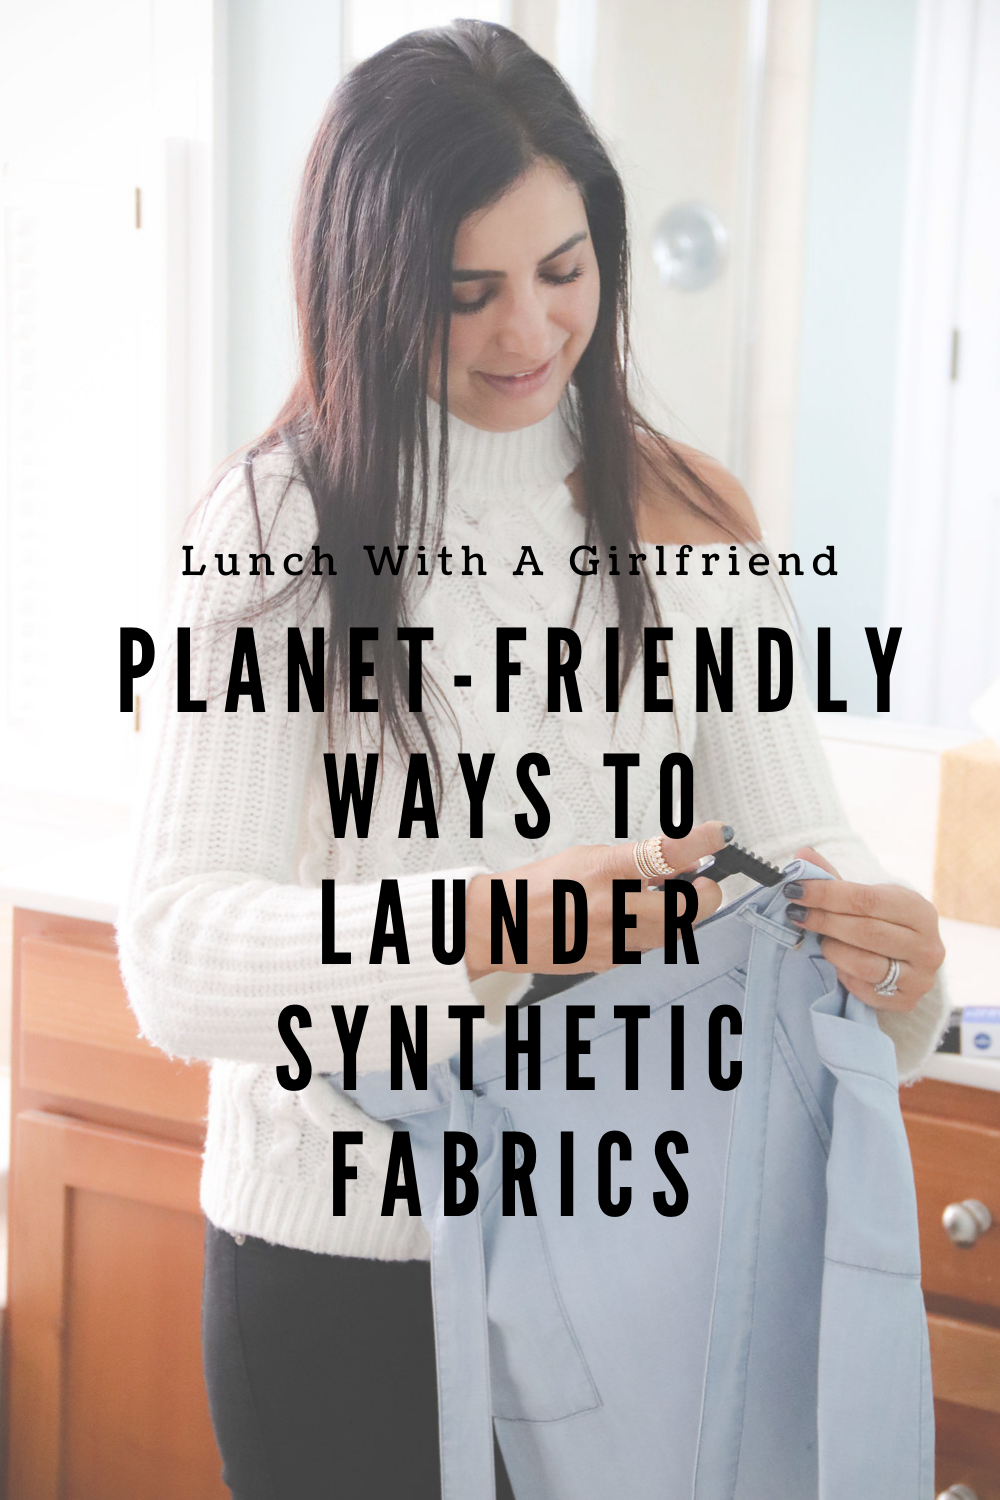 A Planet-Friendly Approach To Laundering Synthetic Fabrics